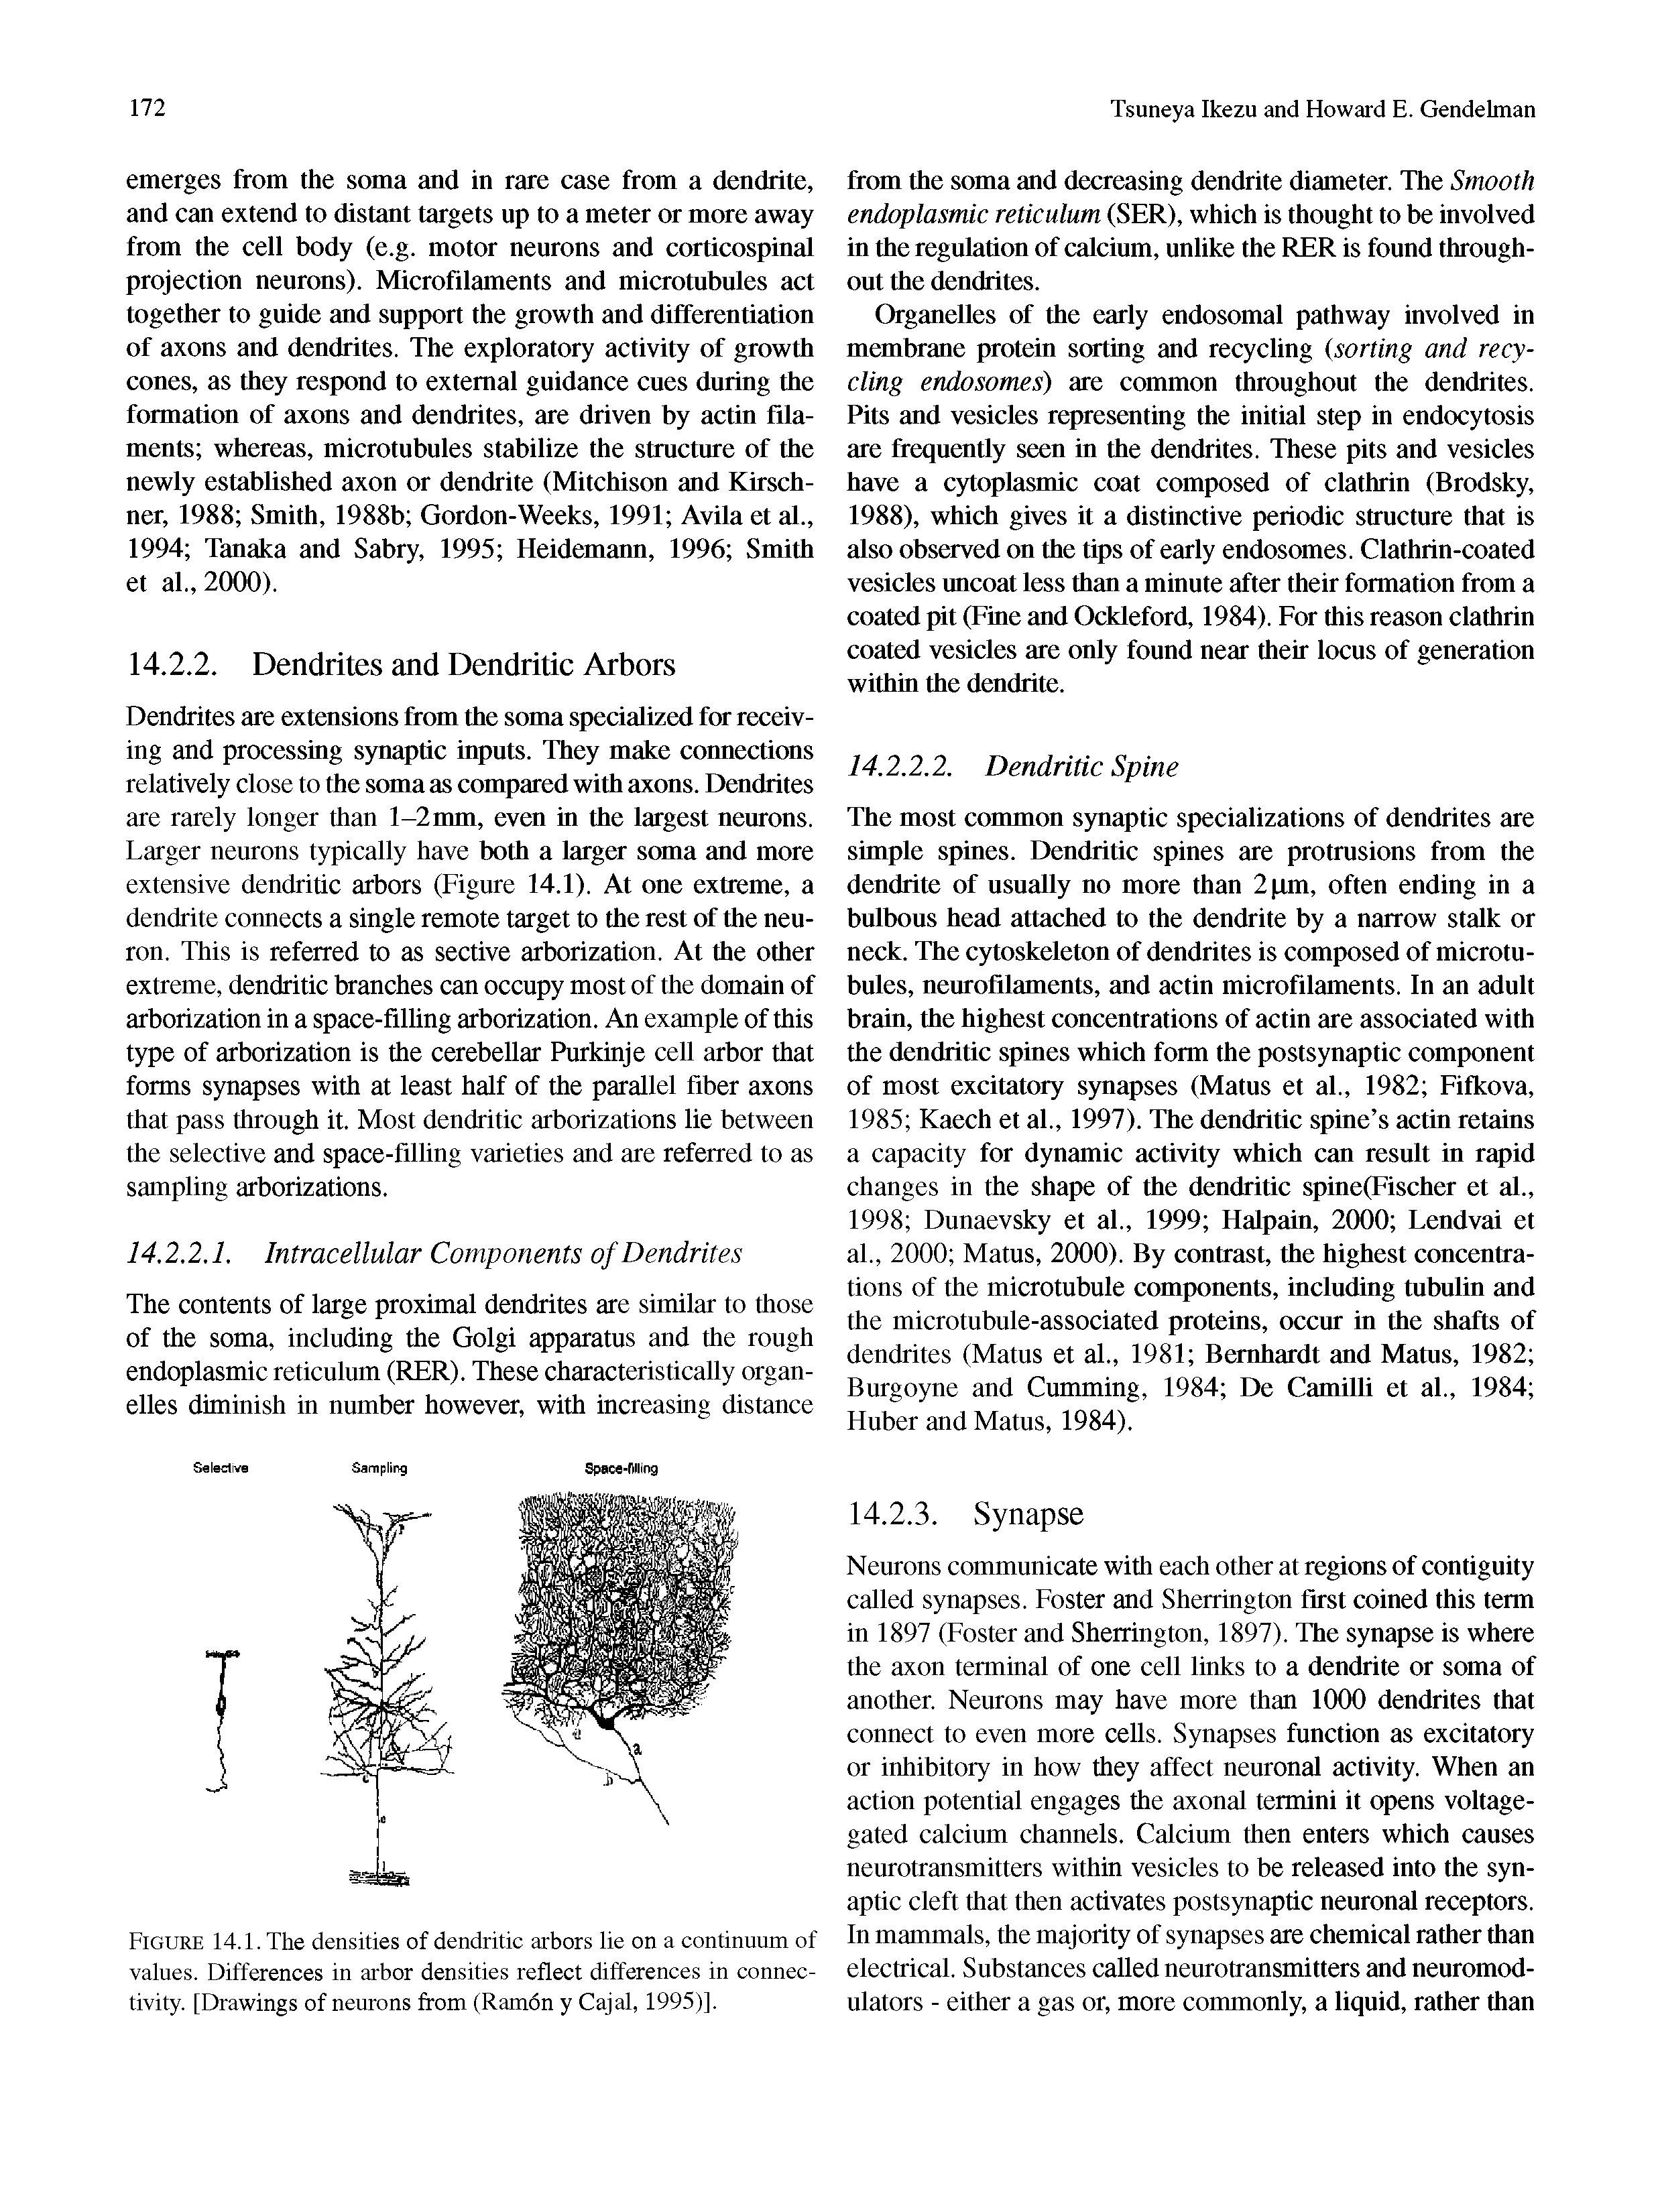 Figure 14.1. The densities of dendritic arbors lie on a continuum of values. Differences in arbor densities reflect differences in connectivity. [Drawings of neurons from (Ramdn y Cajal, 1995)].